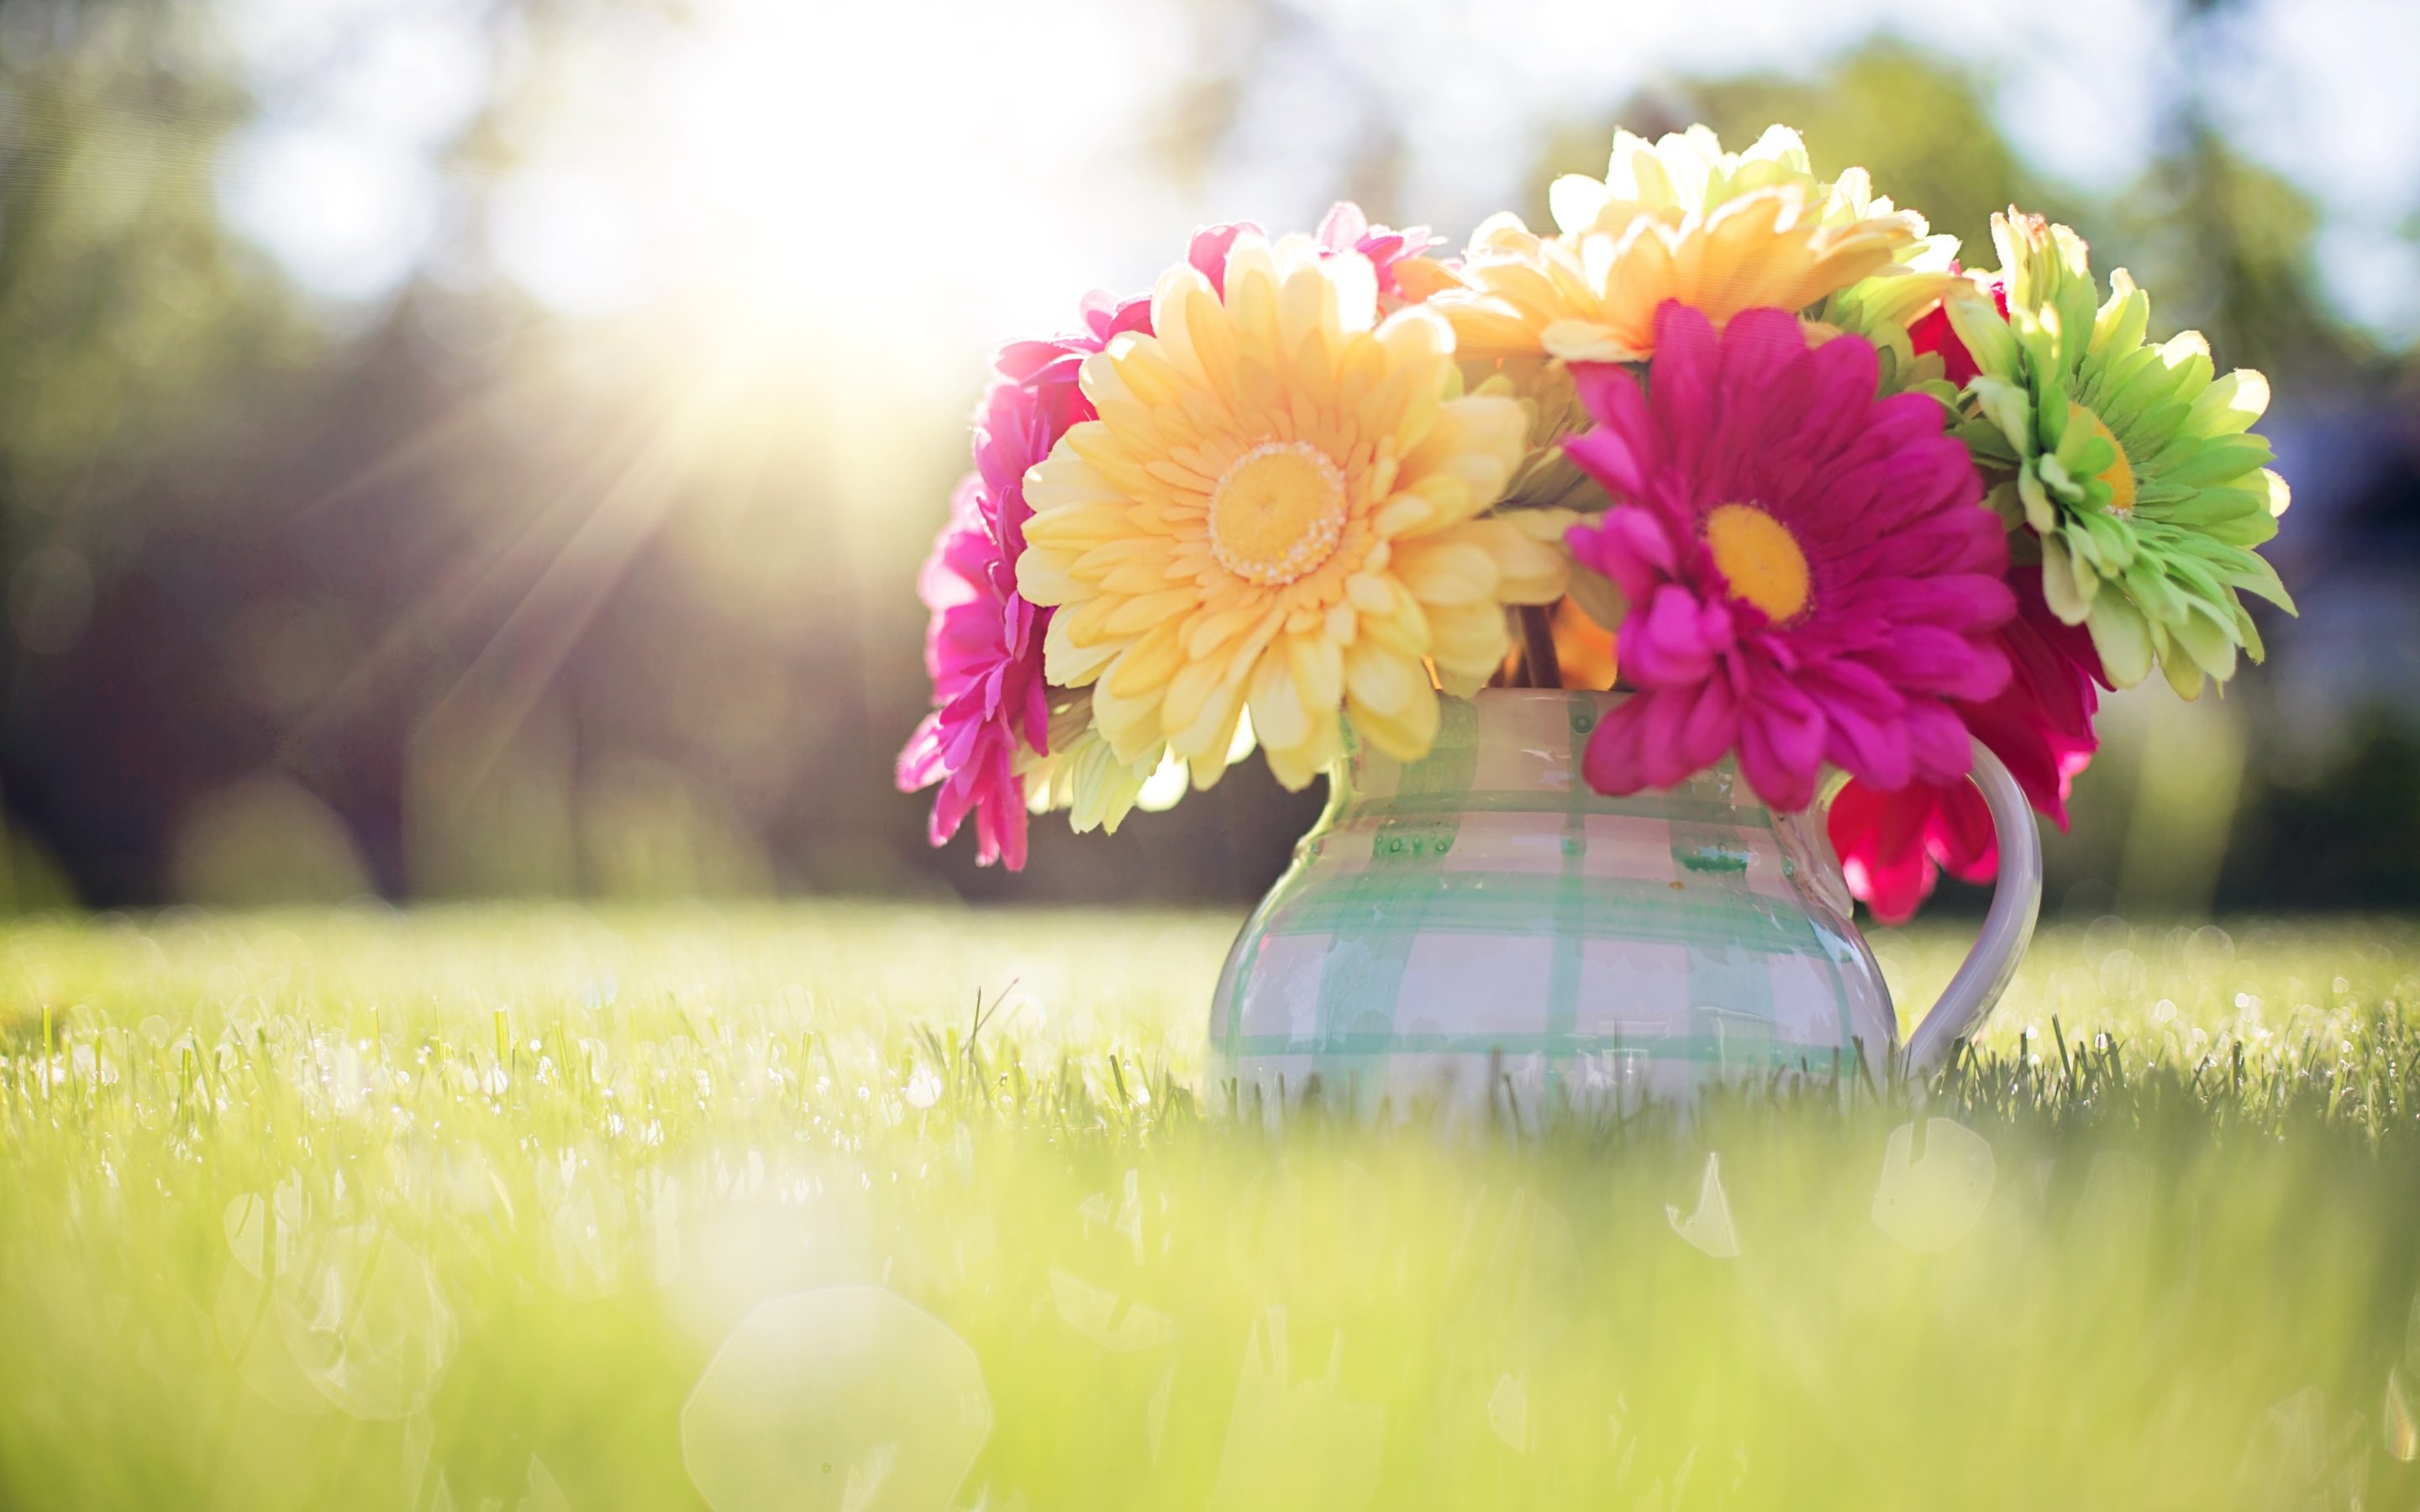 2880x1800 4K HD Wallpaper: Spring Â· 4 Free Pictures related to Spring to have it in  Phones, Desktop Screens, Blogs.